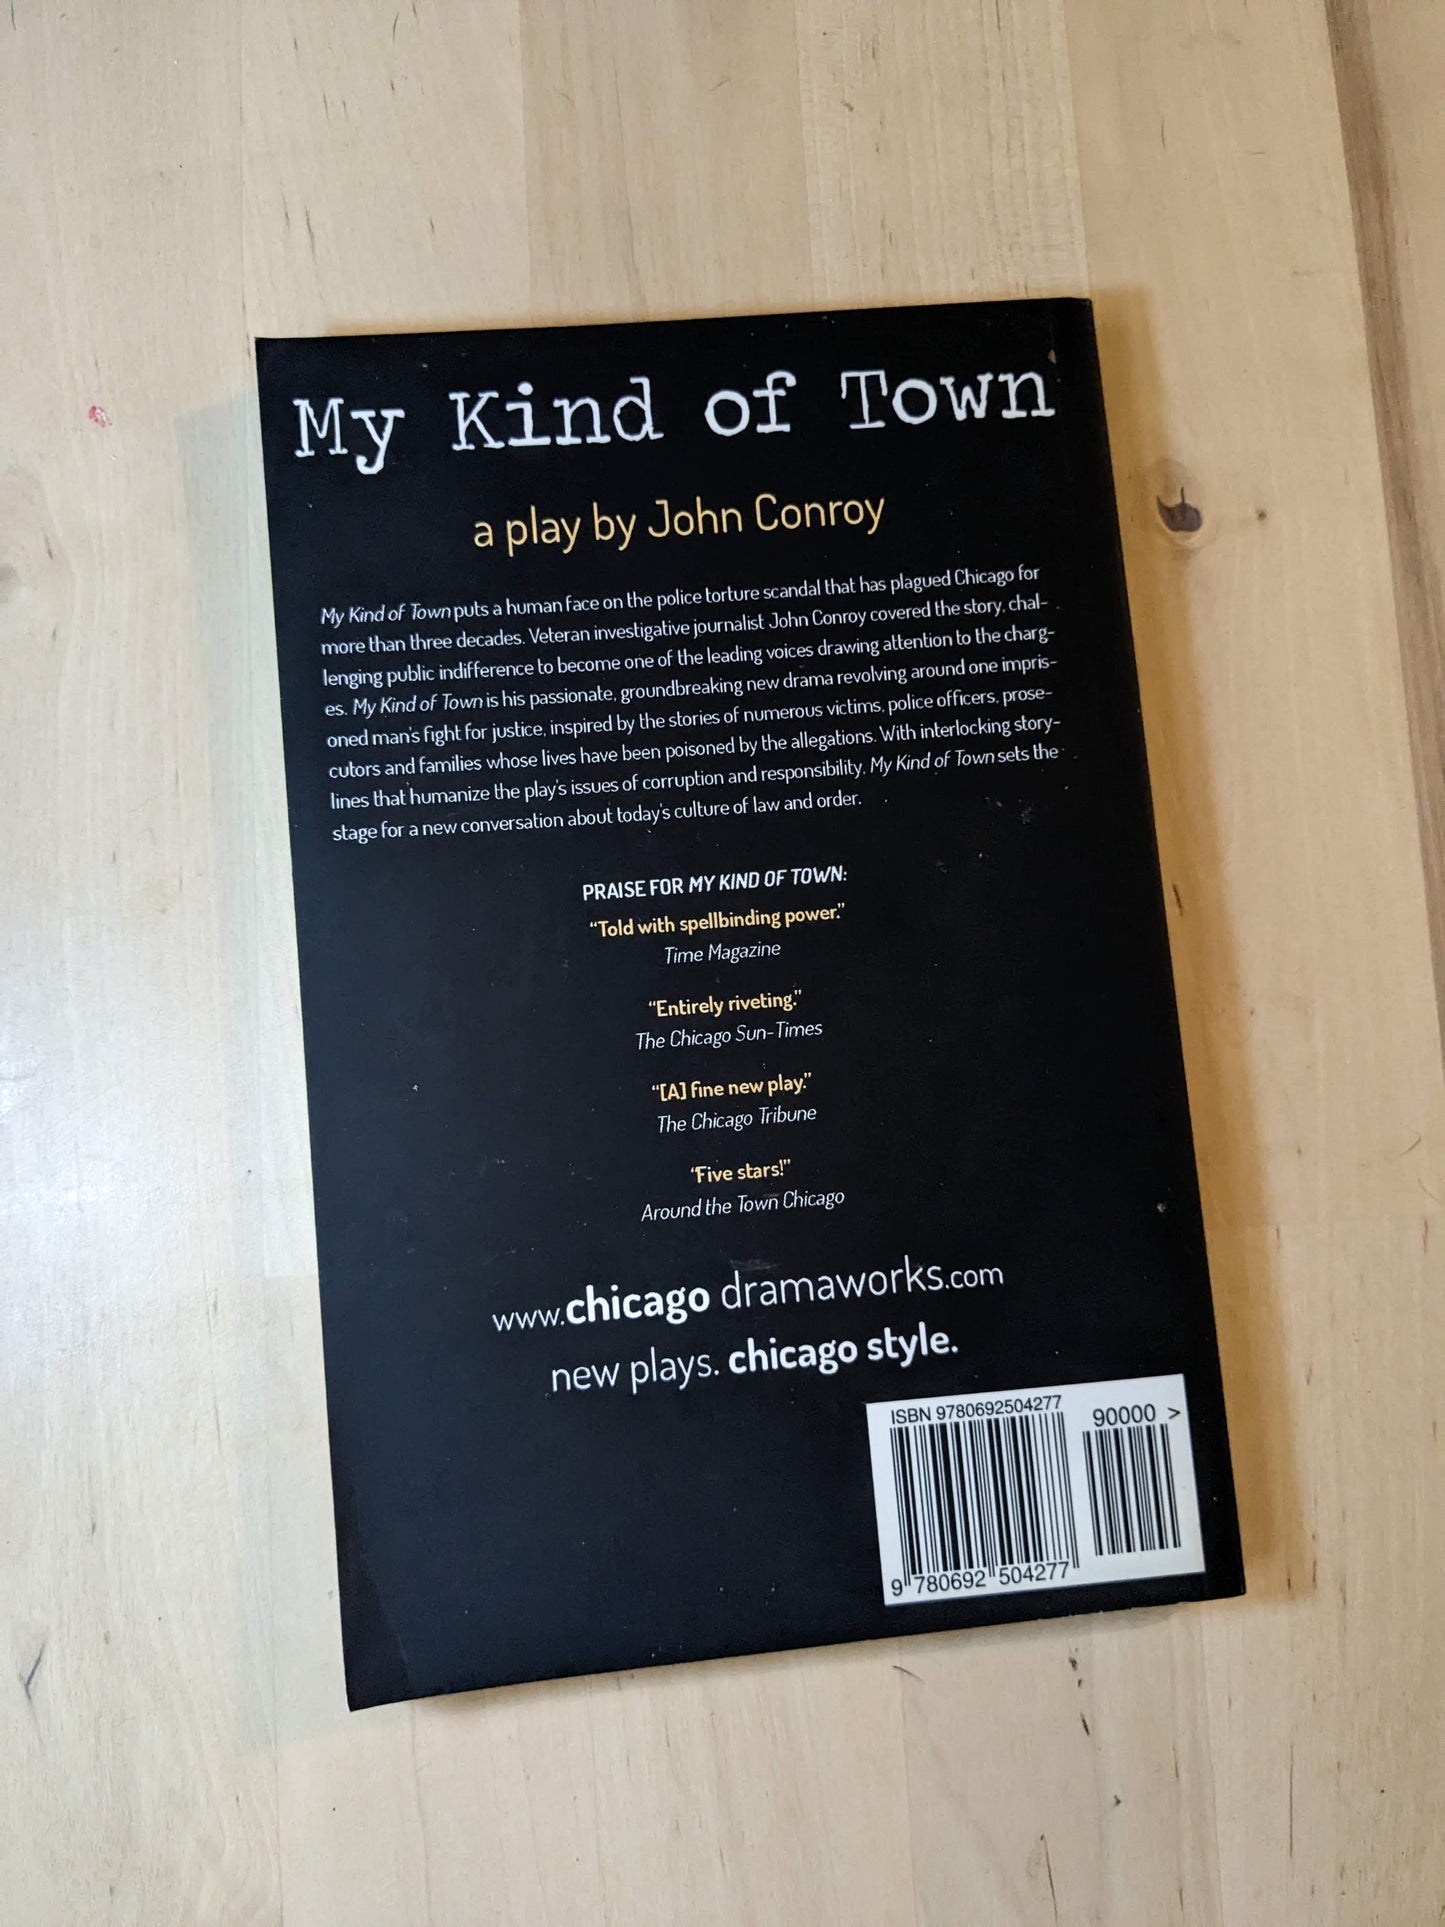 My Kind of Town (Theatrical Play Script) by John Conroy - Asylum Books